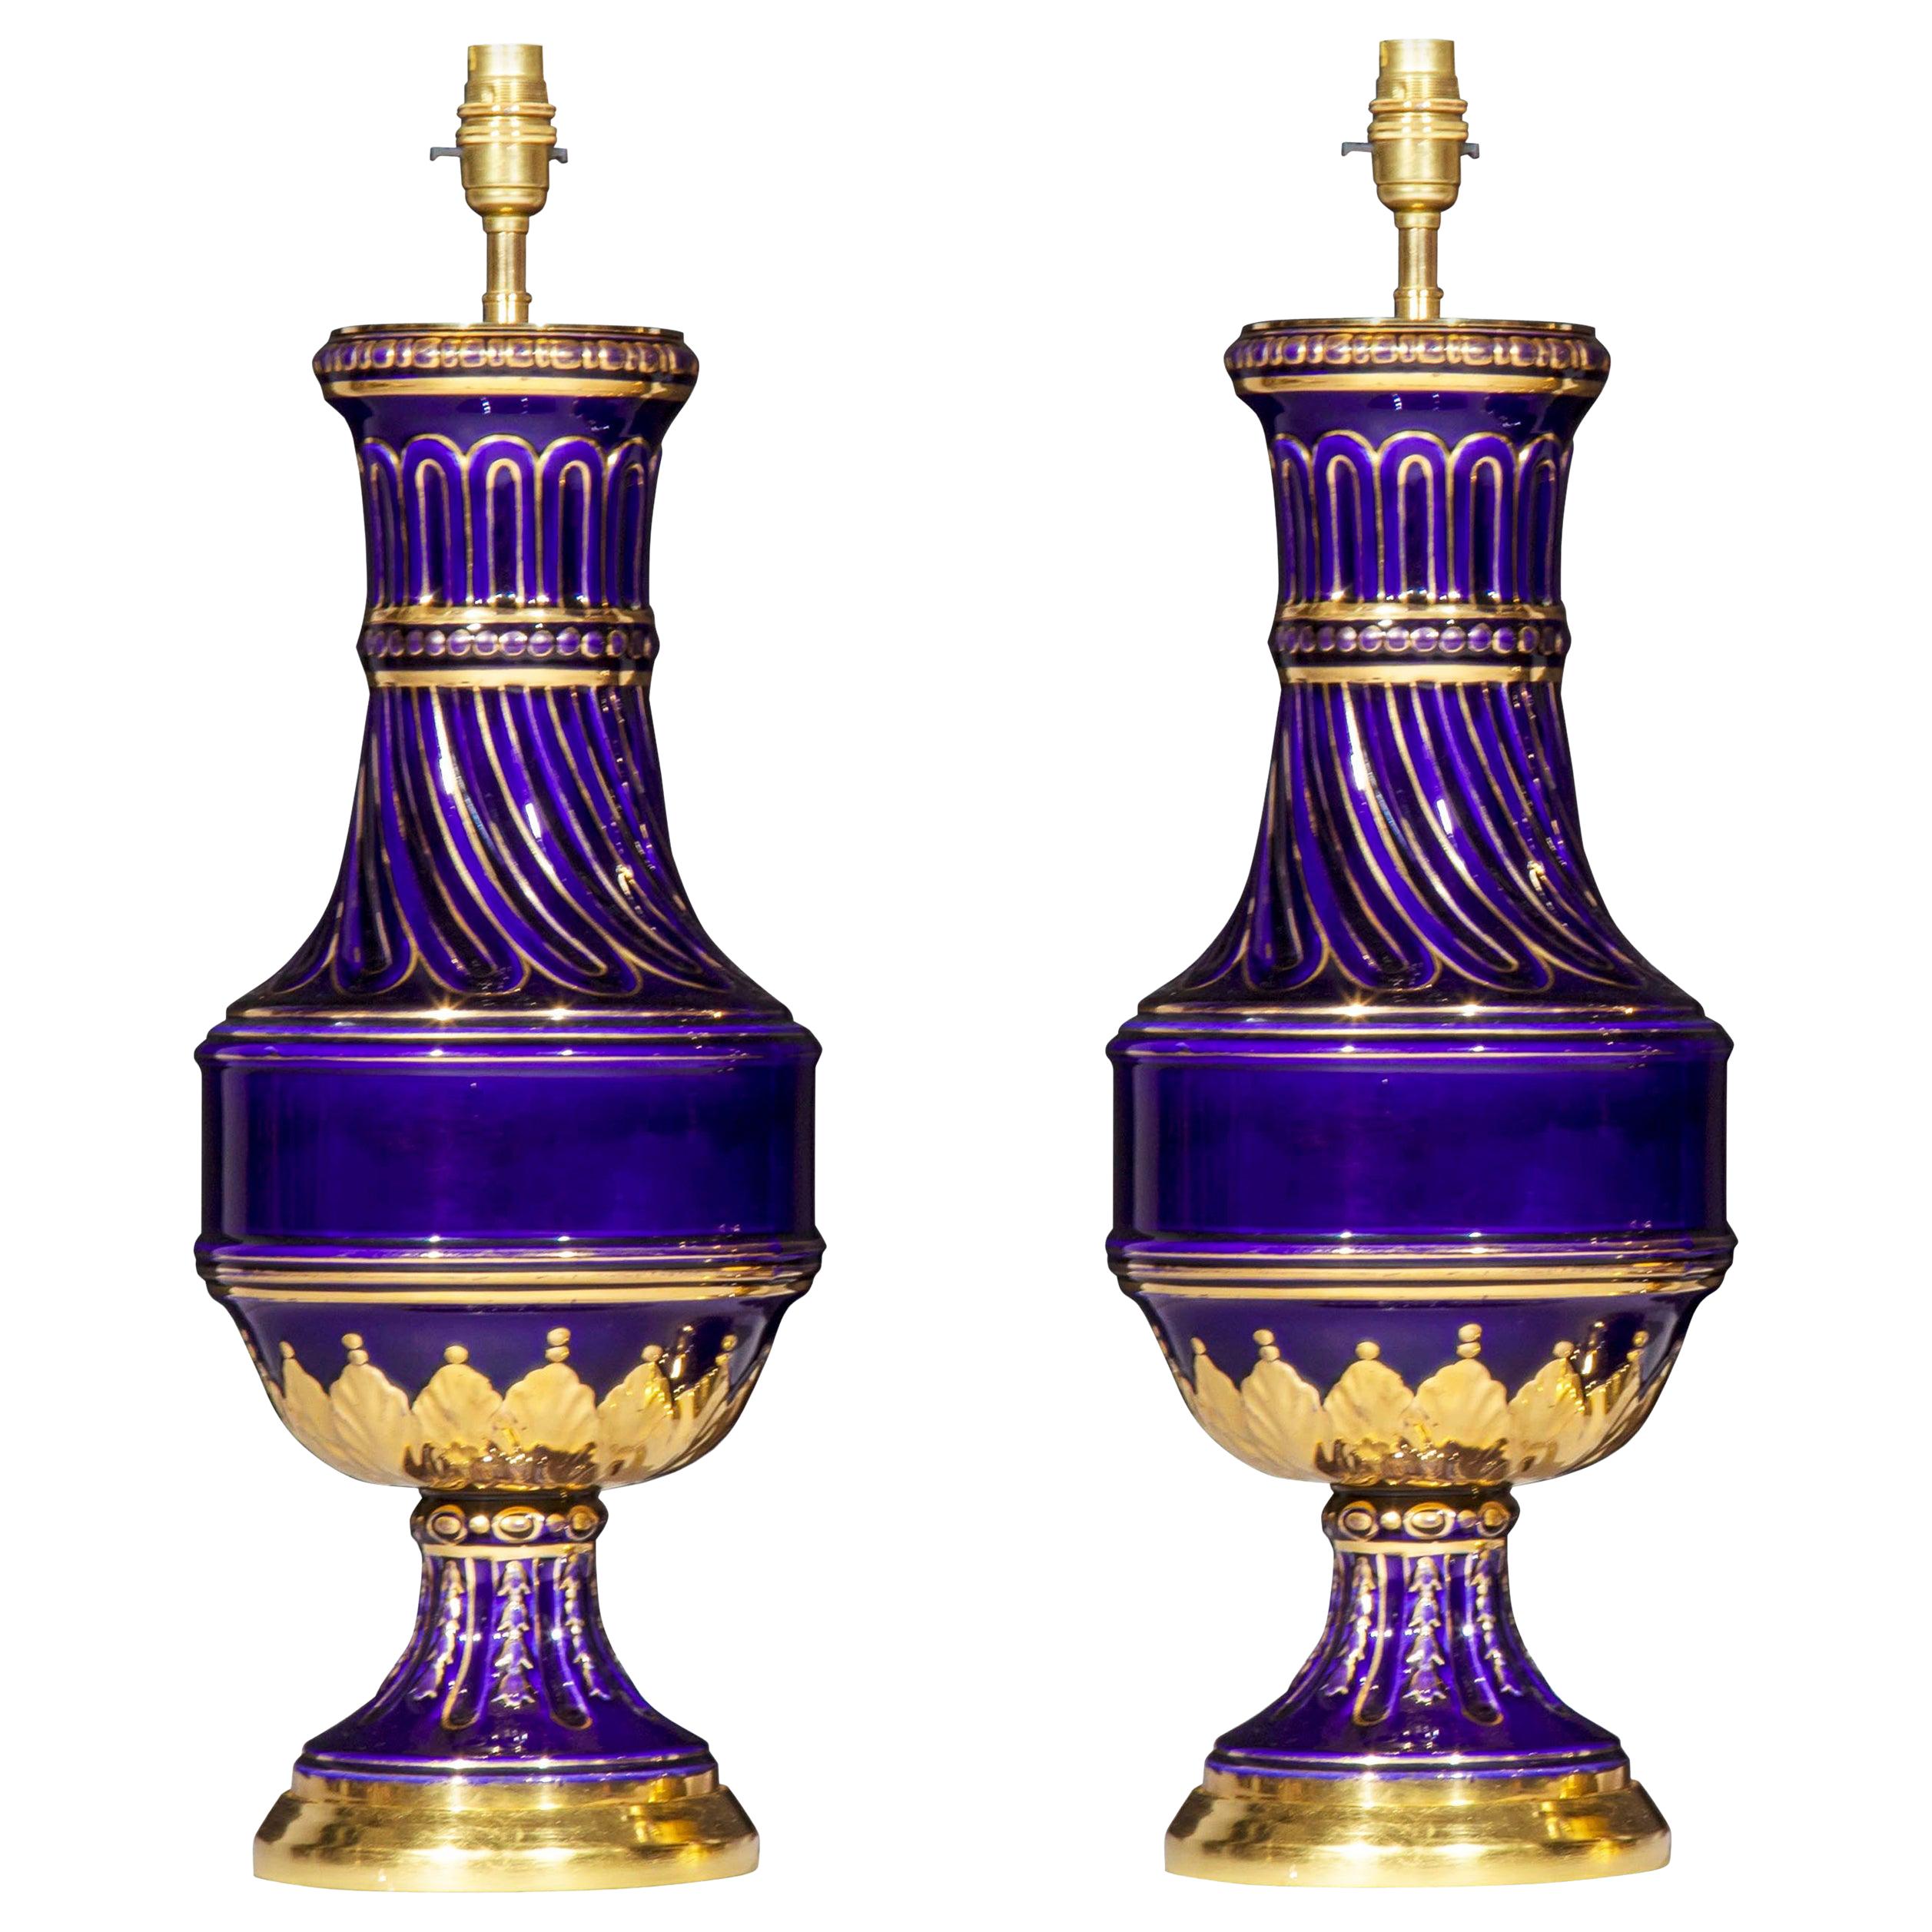 Pair of Antique Sevres Style Table Lamps